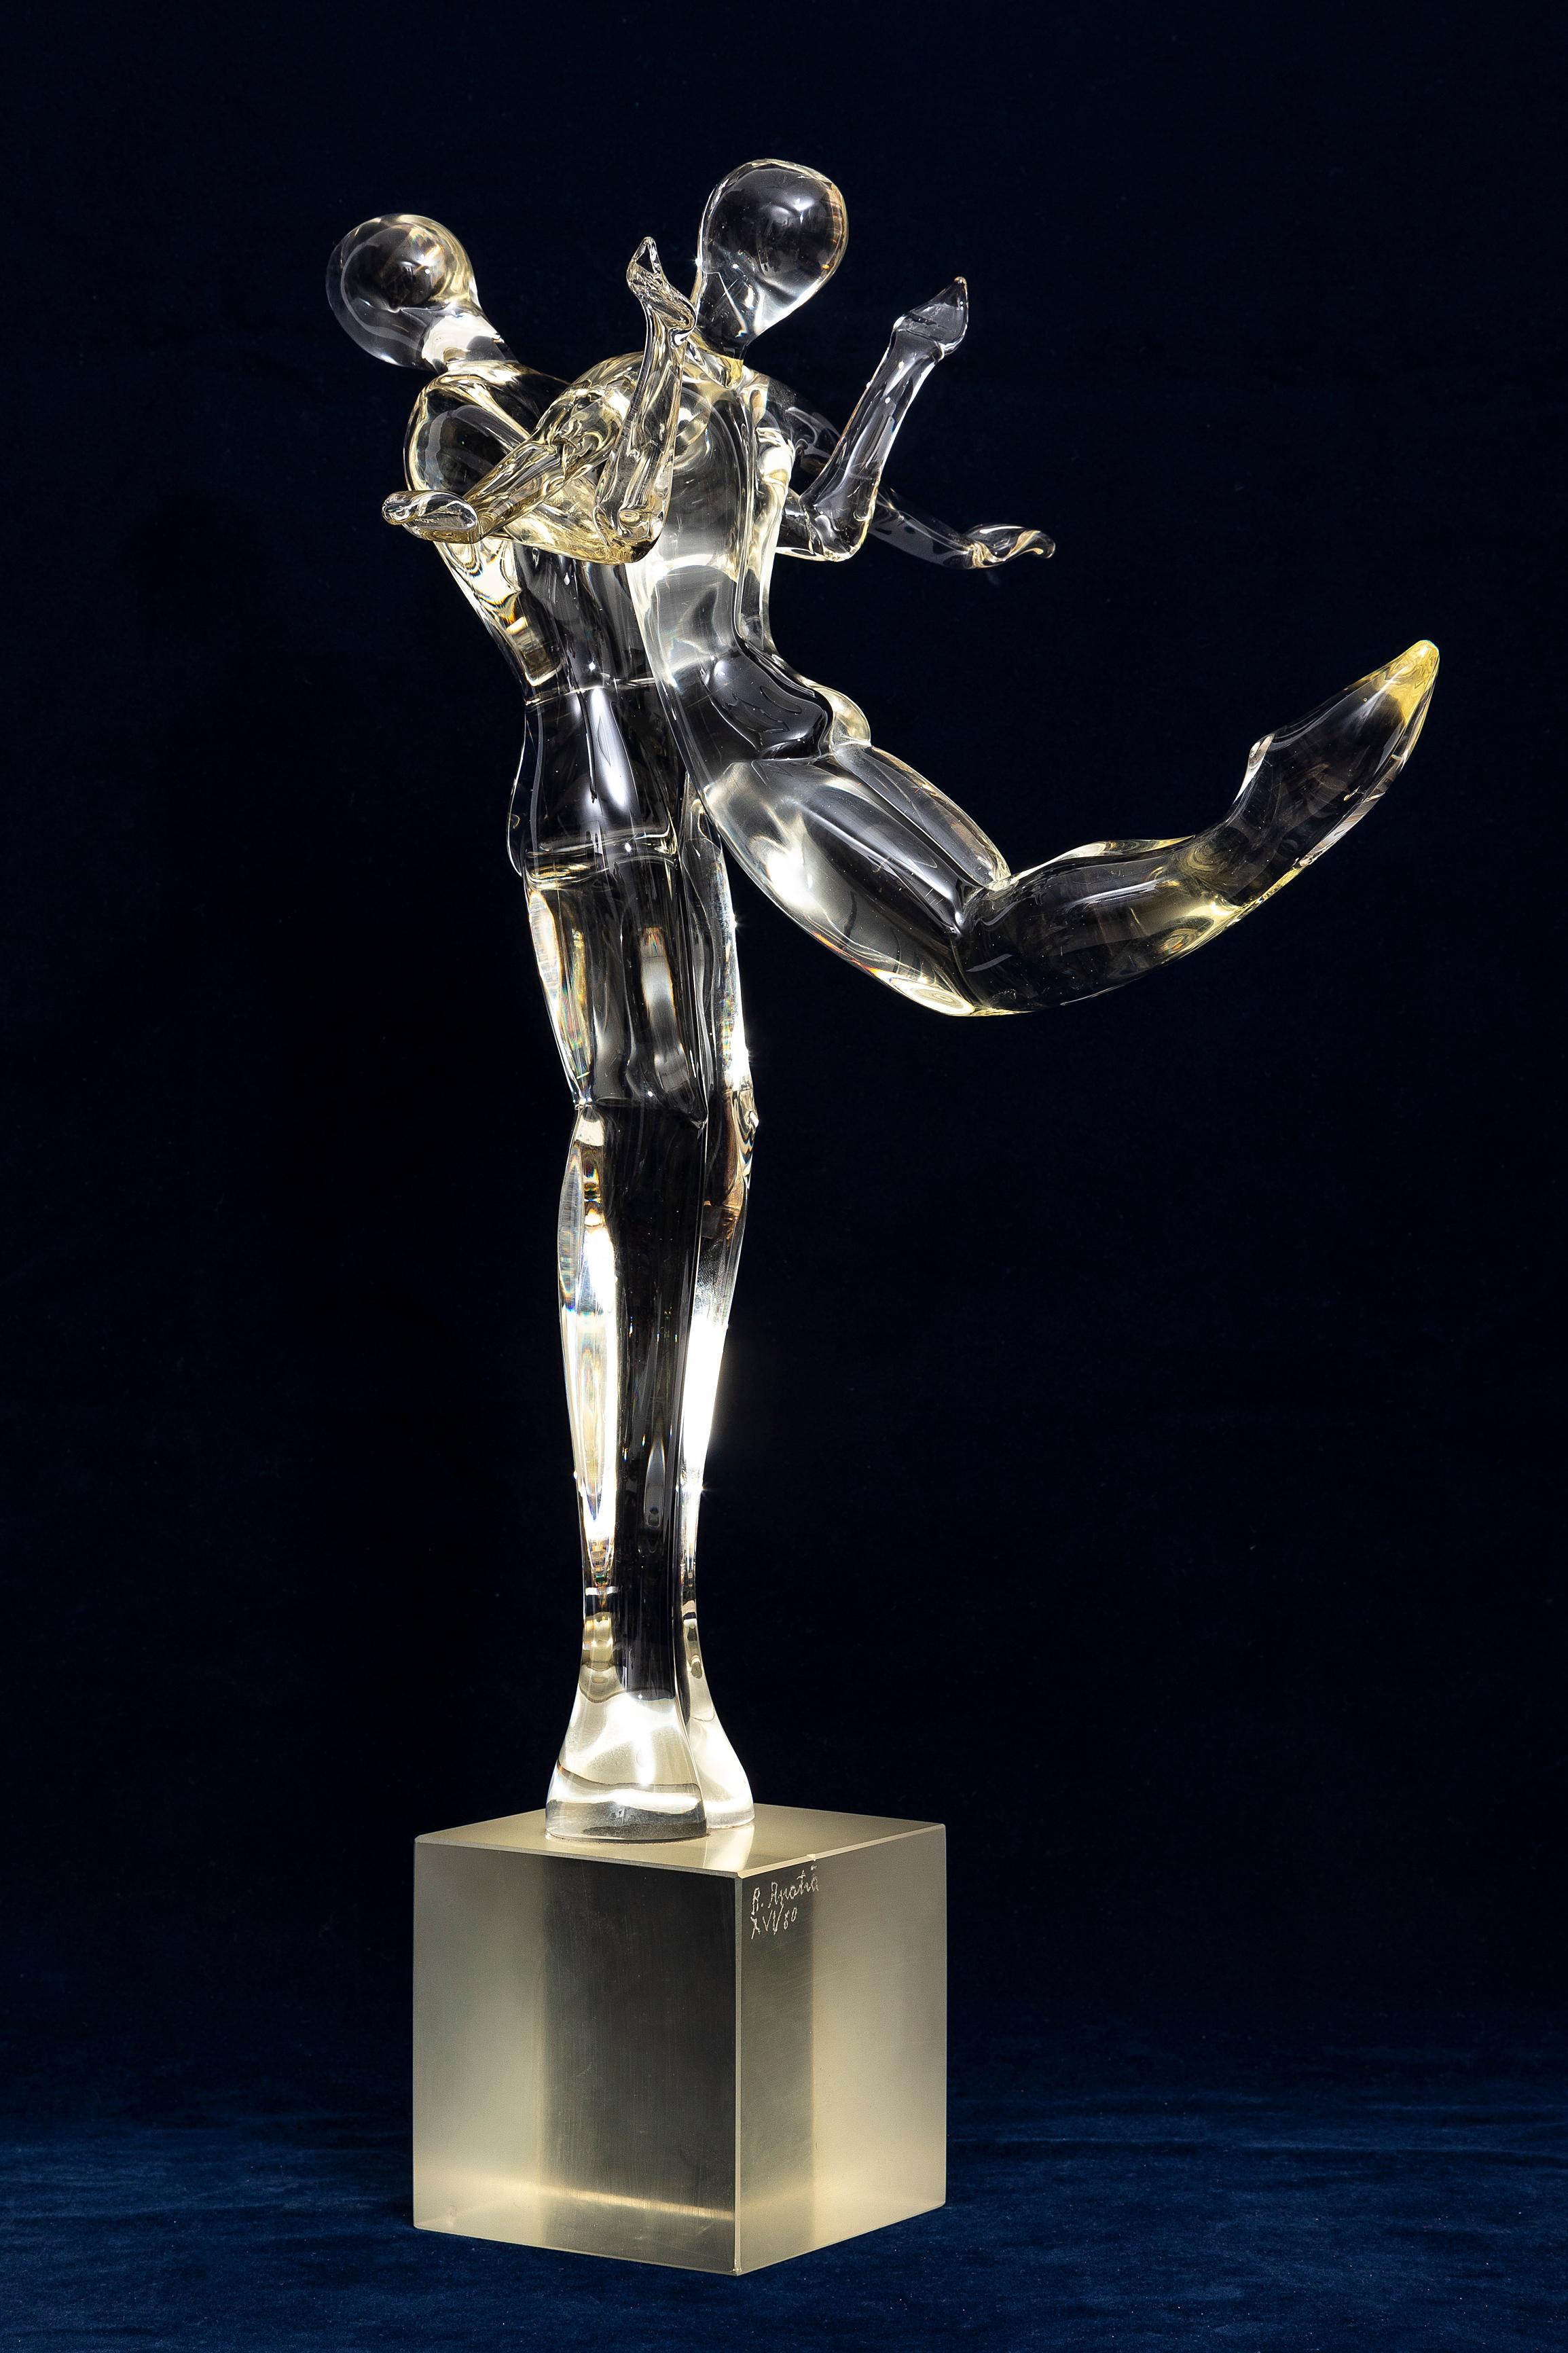 Mid-Century Modern A Two-piece Renato Anatra Gymnast Dancer Sculpture by Murano Art Glass, Signed For Sale